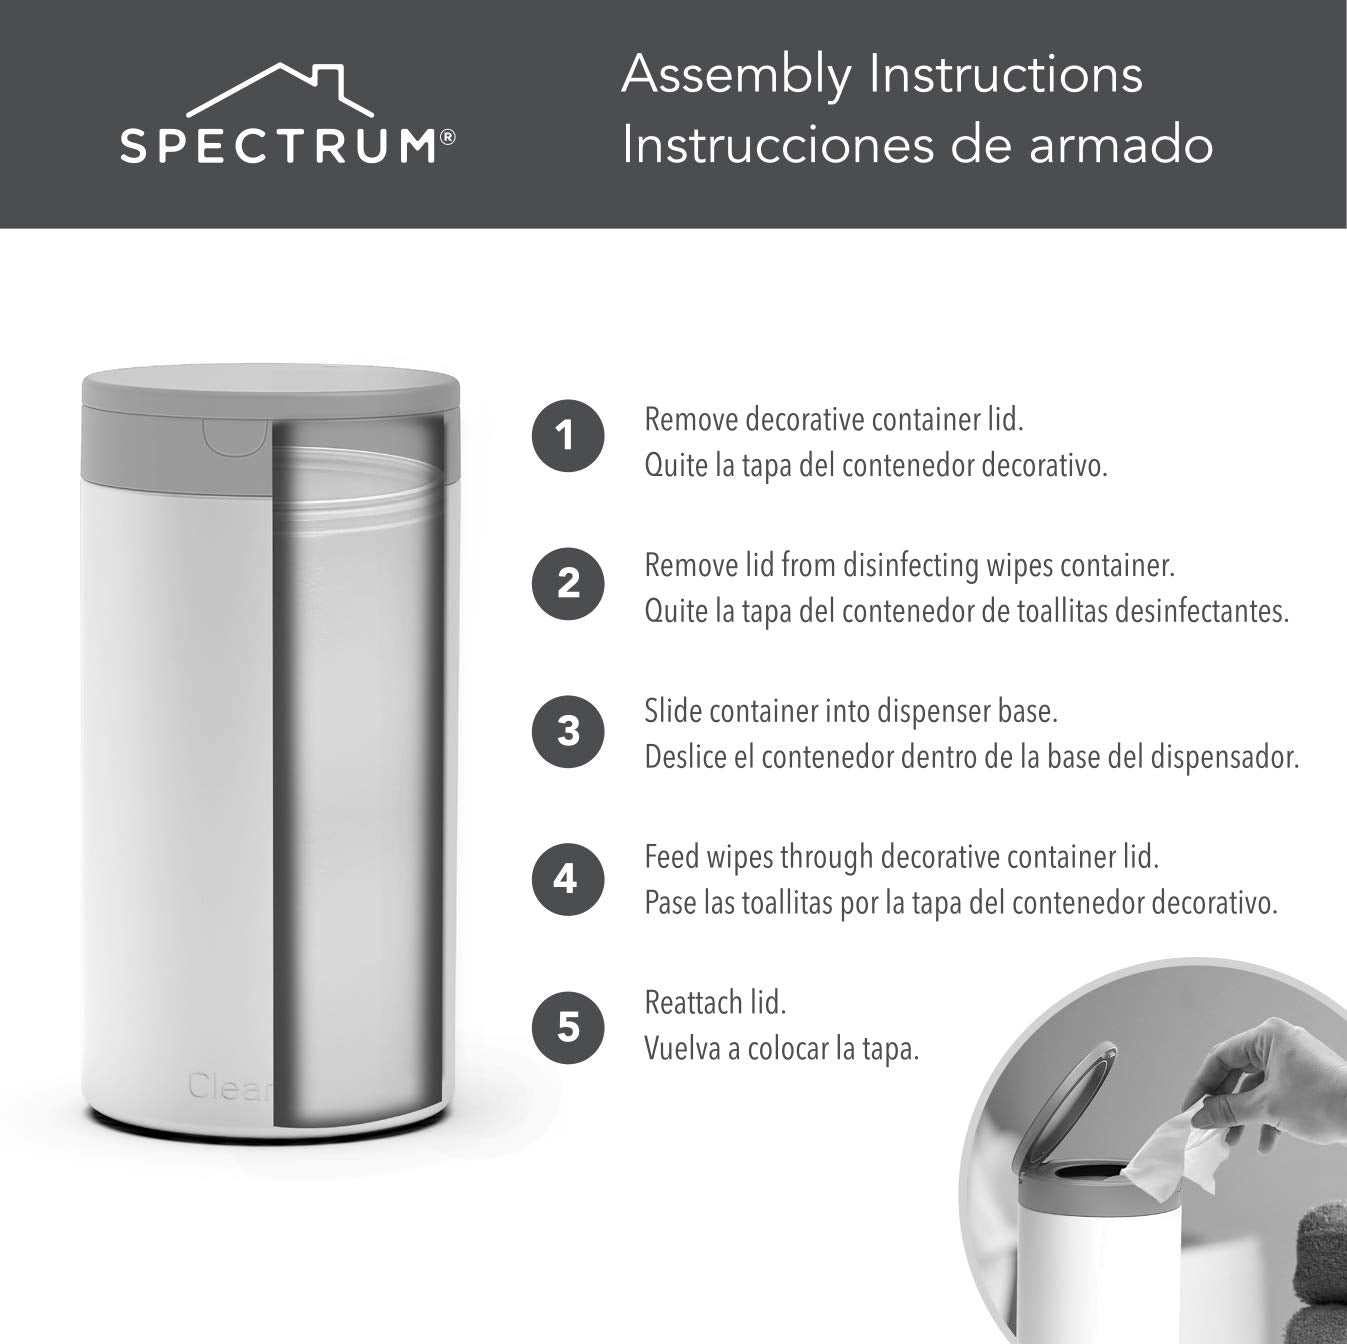 Spectrum Decorative Disinfecting Wipes Container (Black) - Refillable Dispenser for Bathroom, Kitchen, Classroom, Countertop, & Home Storage / Stainless Steel & Rust-Resistant